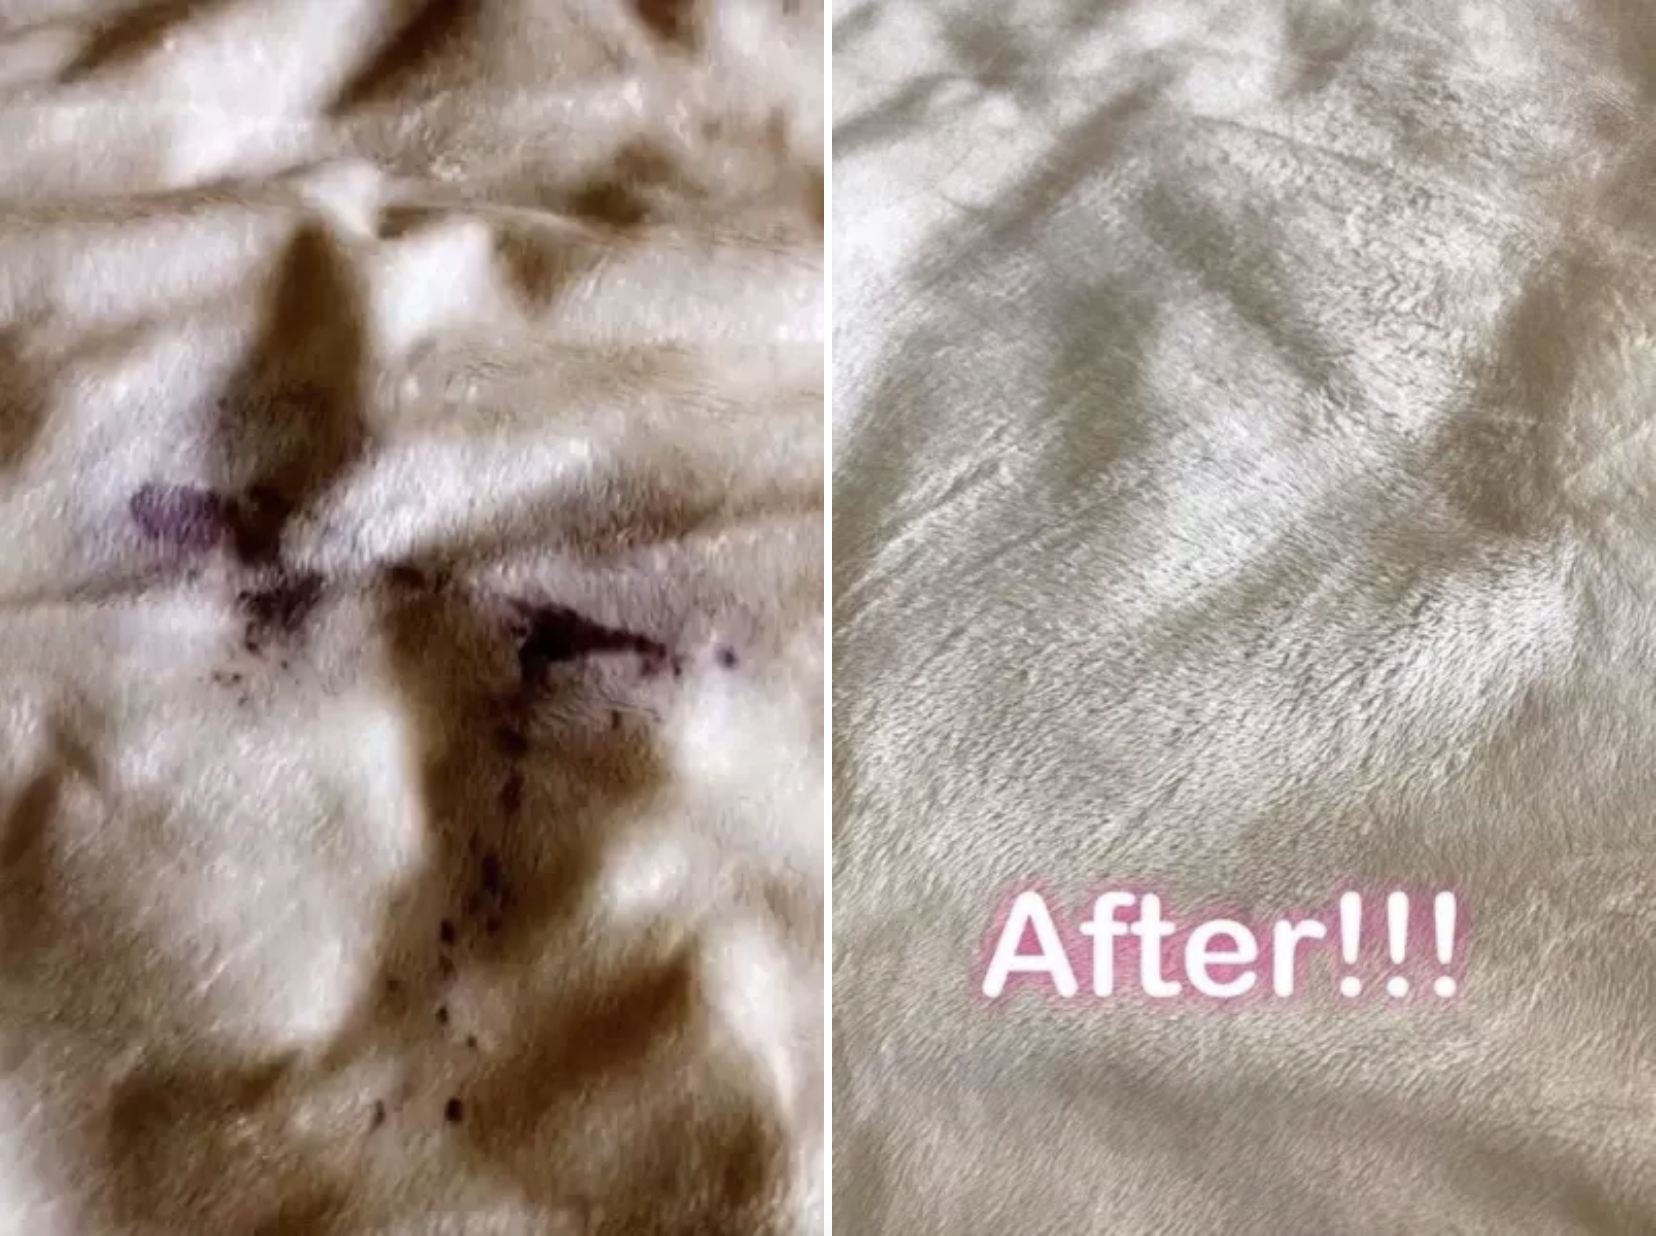 A before/after of a red wine stain being removed from a white fuzzy blanket